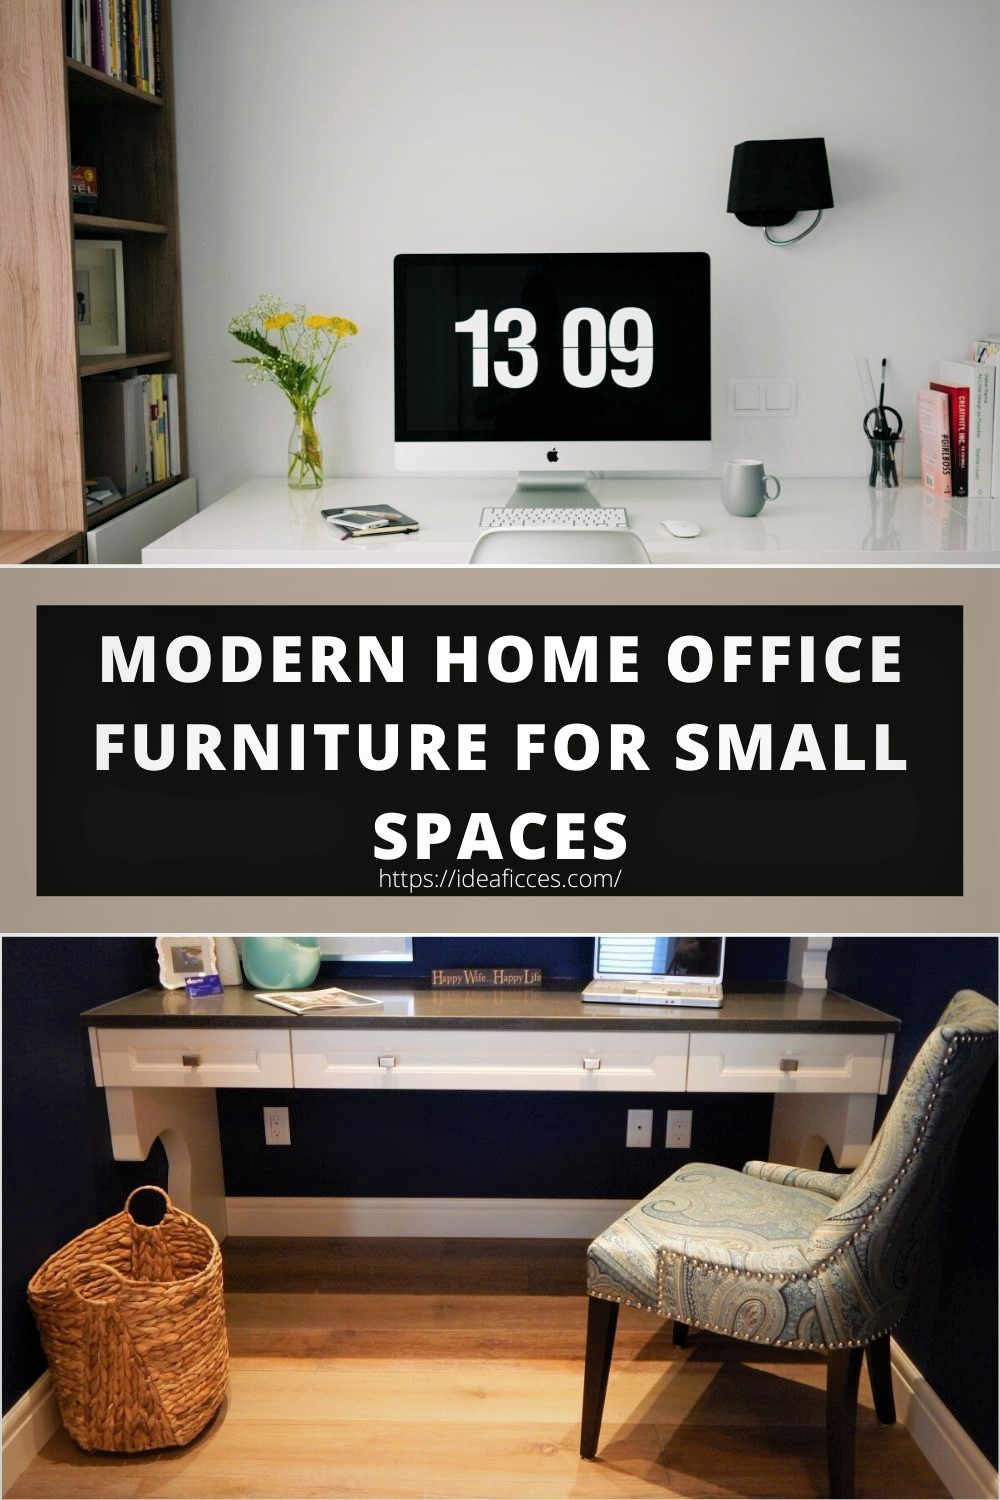 Modern Home Office Furniture for Small Spaces - Ideas for Home Office